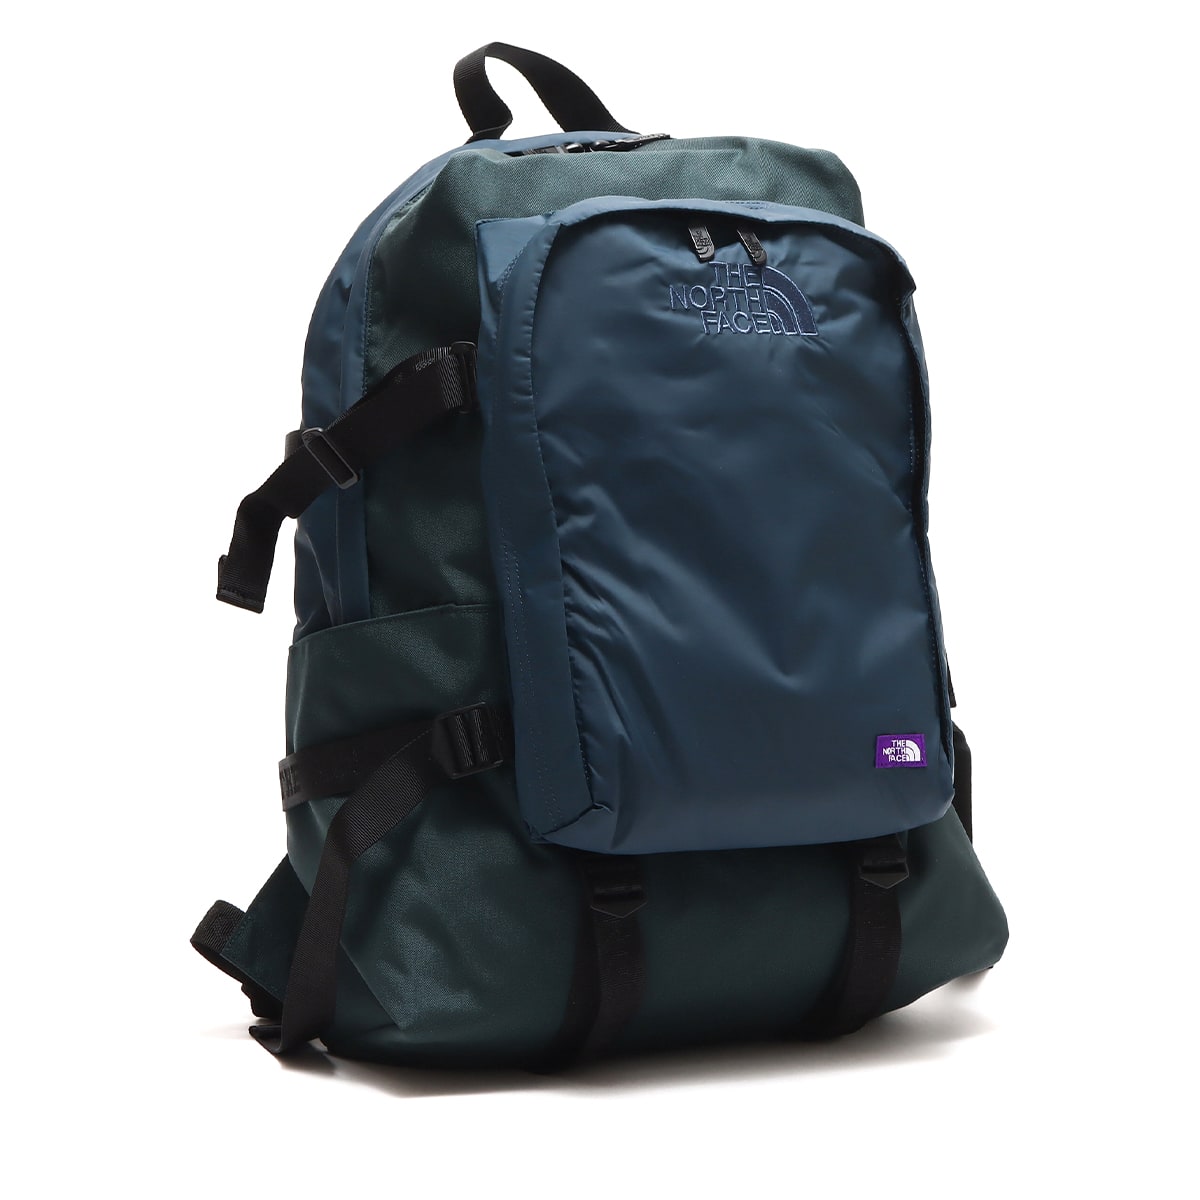 THE NORTH FACE PURPLE LABEL CORDURA Nylon Day Pack Light Navy X Teal Green  22FW-I